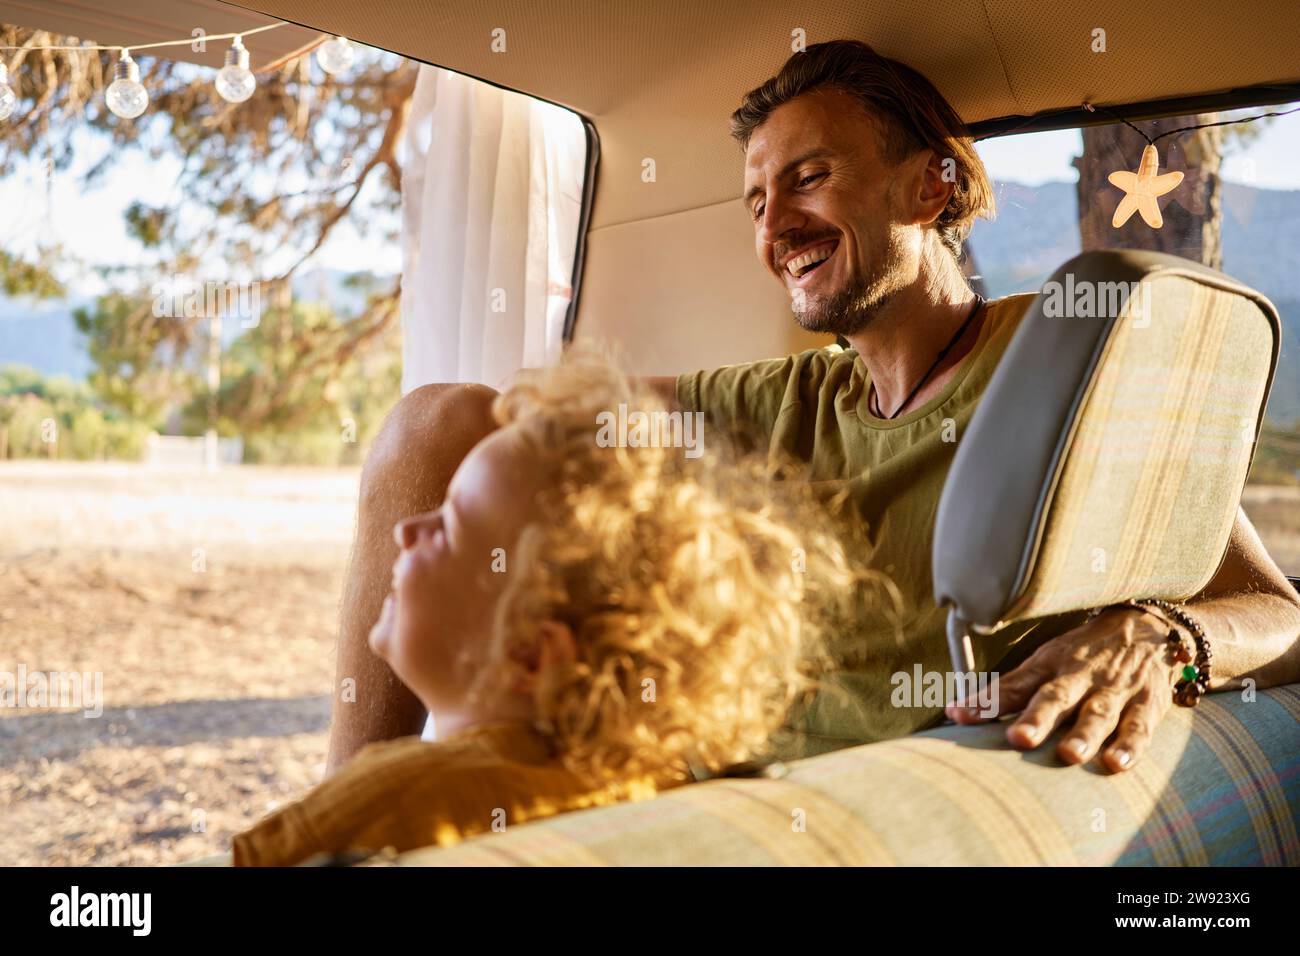 Father laughing with daughter and spending leisure time in caravan Stock Photo